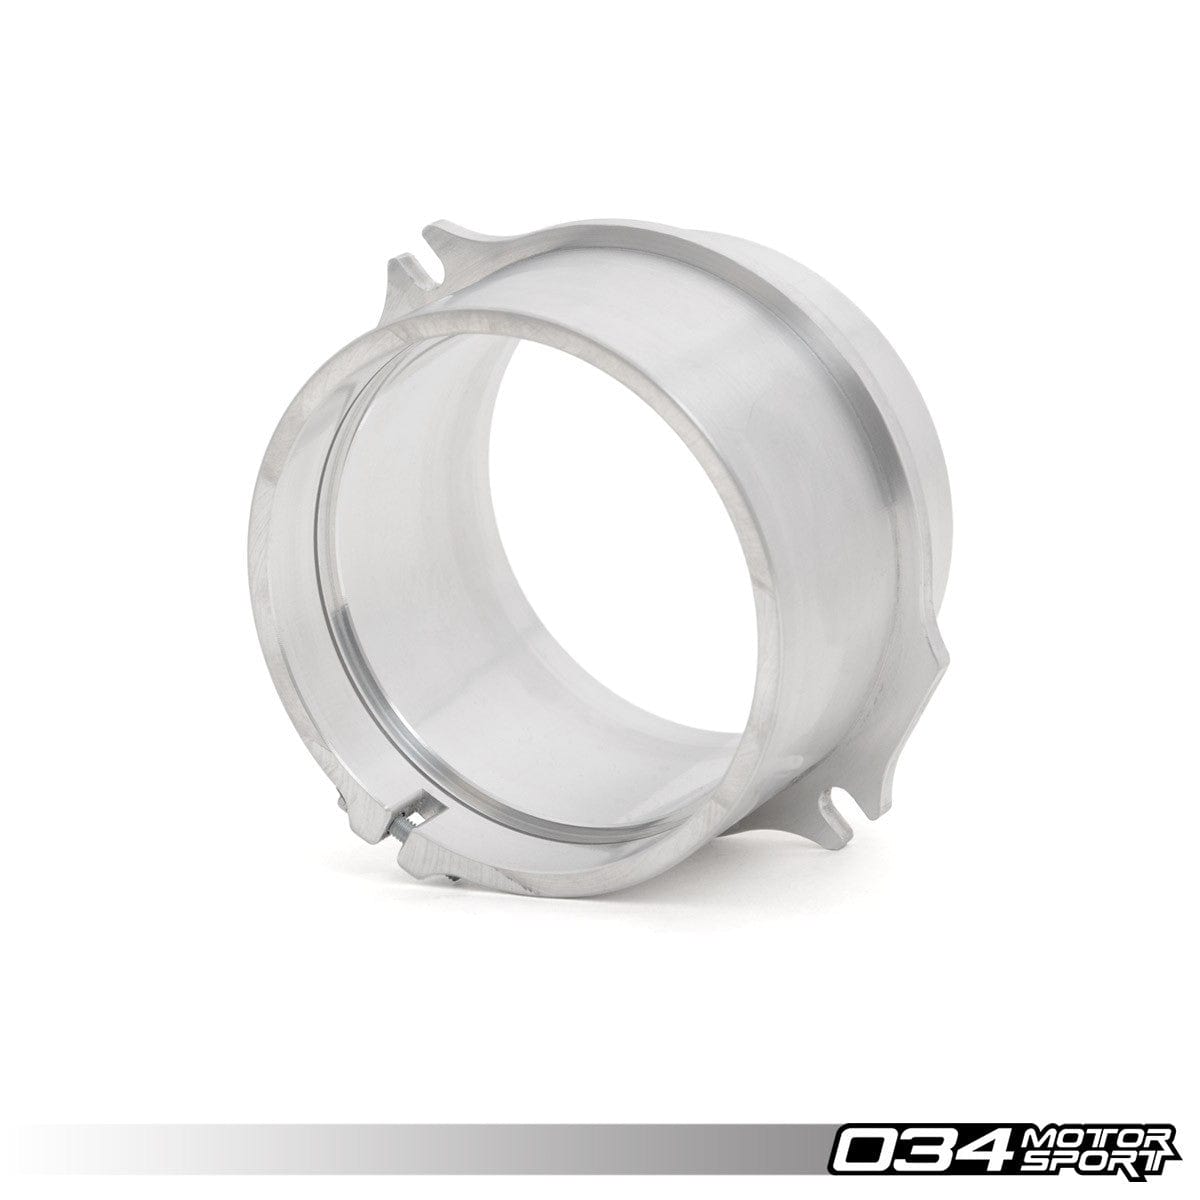 034Motorsport MAF Housing Adapter, 2.7T Billet 85mm Housing To RS4 Airbox - ML Performance